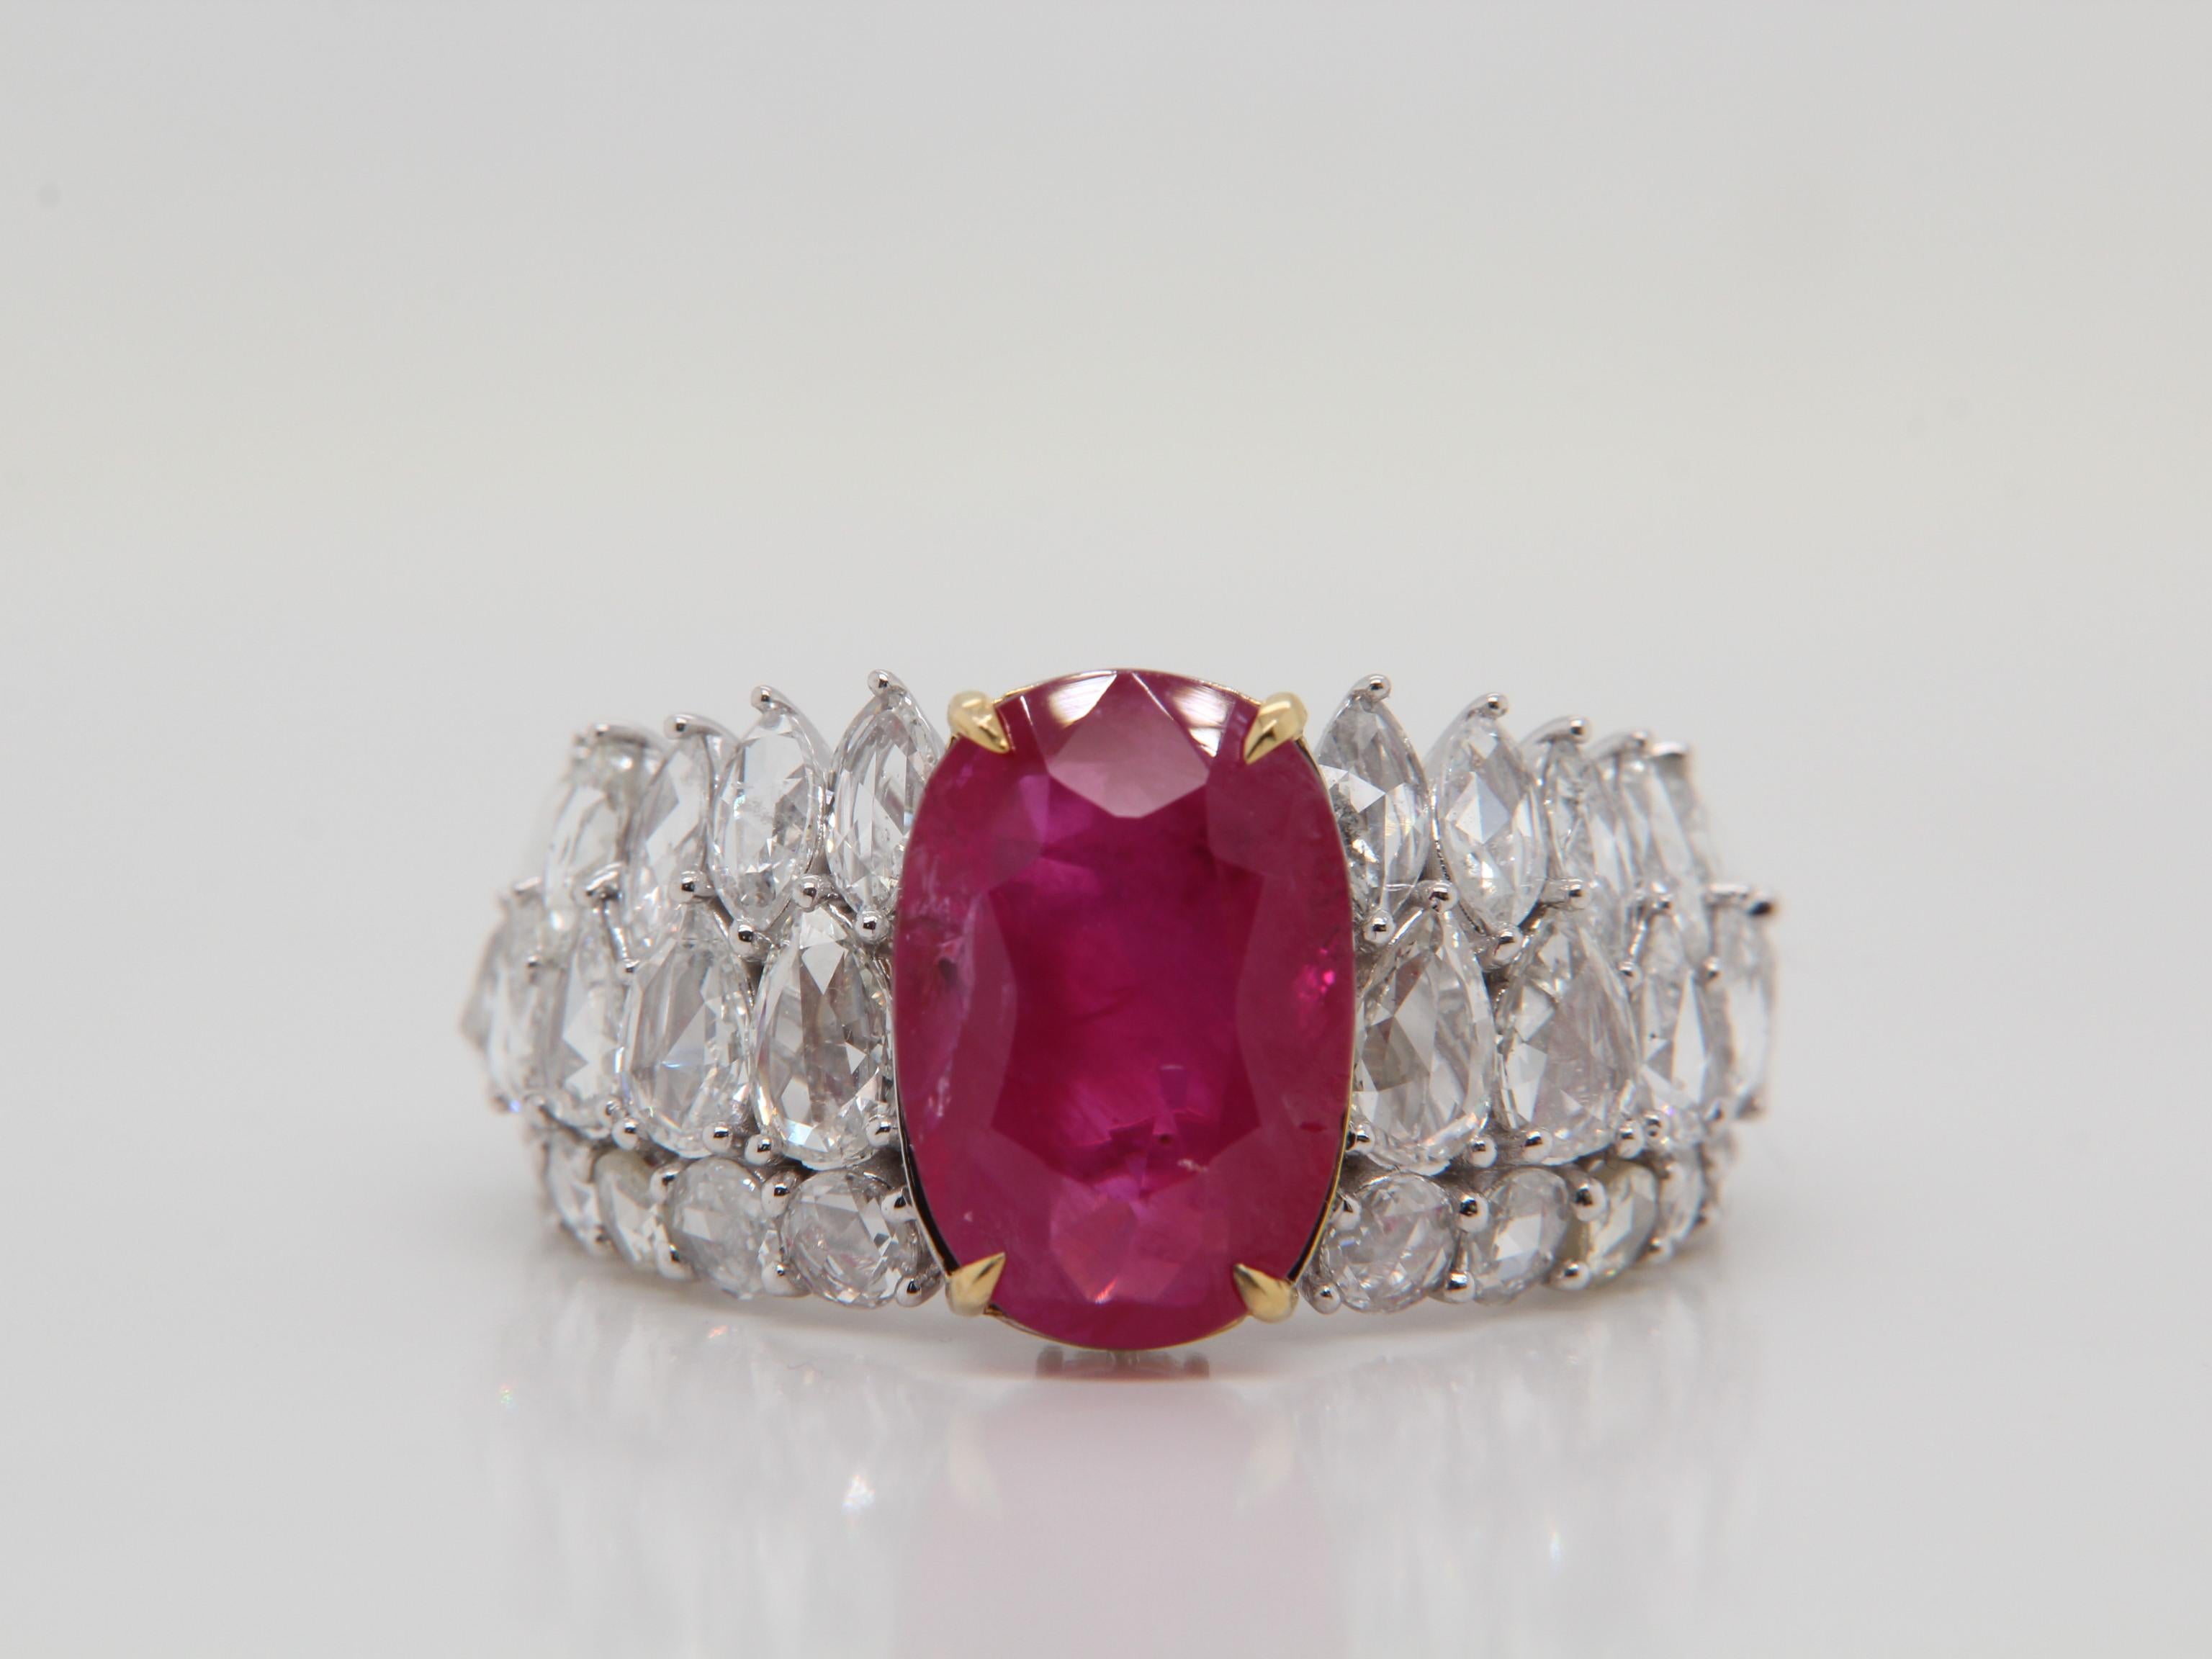 A brand new handcrafted ruby ring by Rewa Jewels. The ring's center stone is 5.07 carat Burmese ruby certified by Gem Research Swisslab (GRS) as natural, unheated, 'Red' with the certificate number 2020-071618. The centre ruby has been set with four